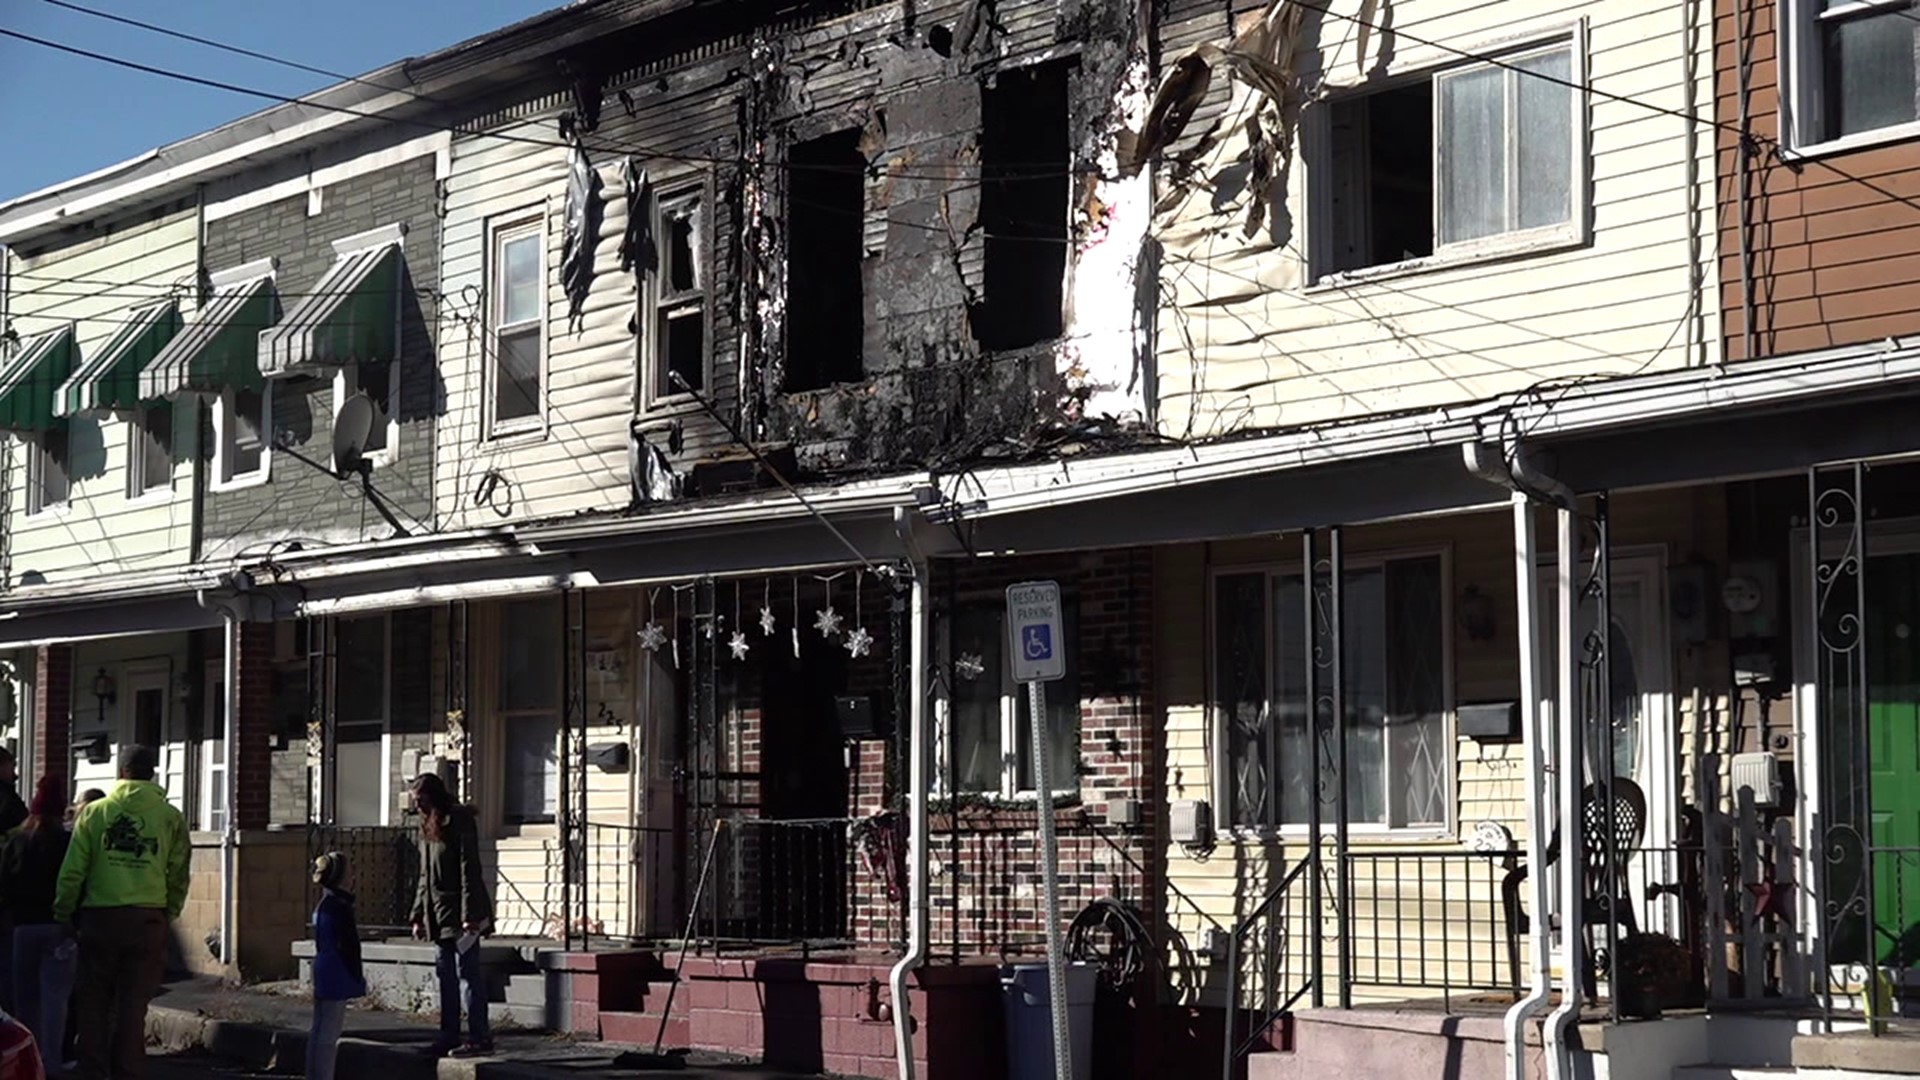 Flames broke out around 10 a.m. along Orwigsburg Street Monday morning.